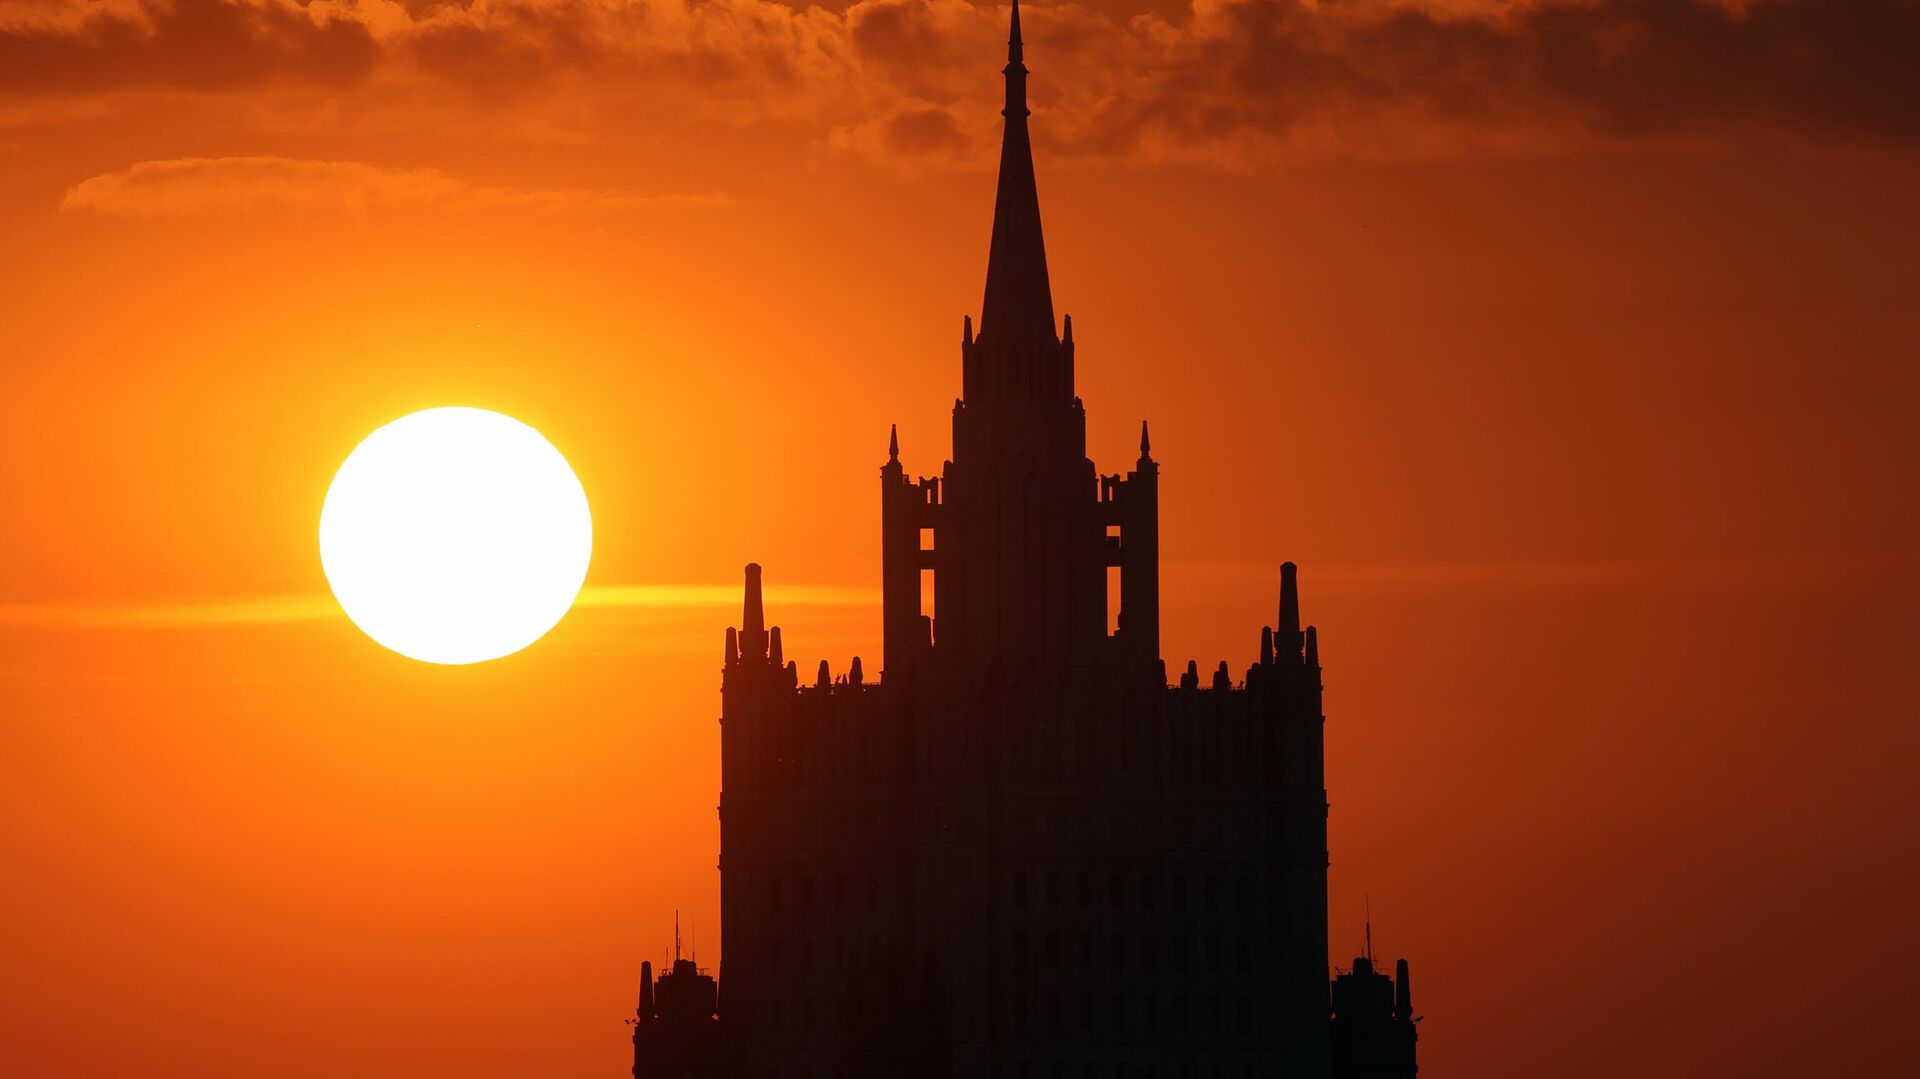 Russian Foreign Ministry's building is silhouetted against the setting sun, in Moscow, Russia. - Sputnik International, 1920, 31.03.2023